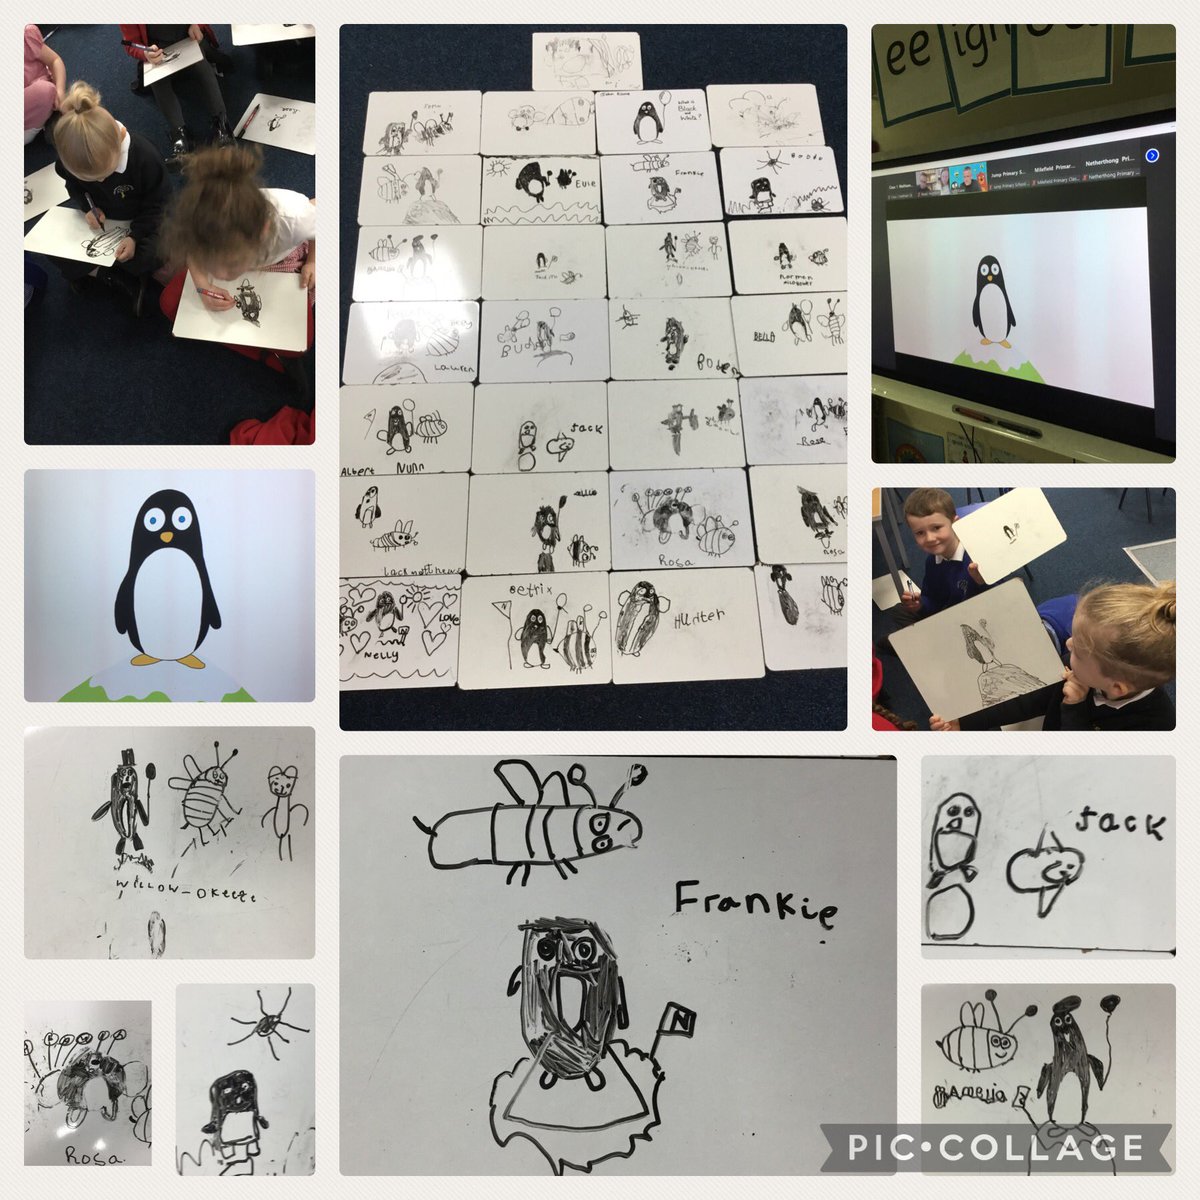 Last week we joined @read_holmfirth to hear author John Kane read us his fantastic, funny book ‘What is Black and white. We loved listening to the story and sending him our predictions as to what might happen next. Highly recommend the book, here are our penguins! #MelthamLit